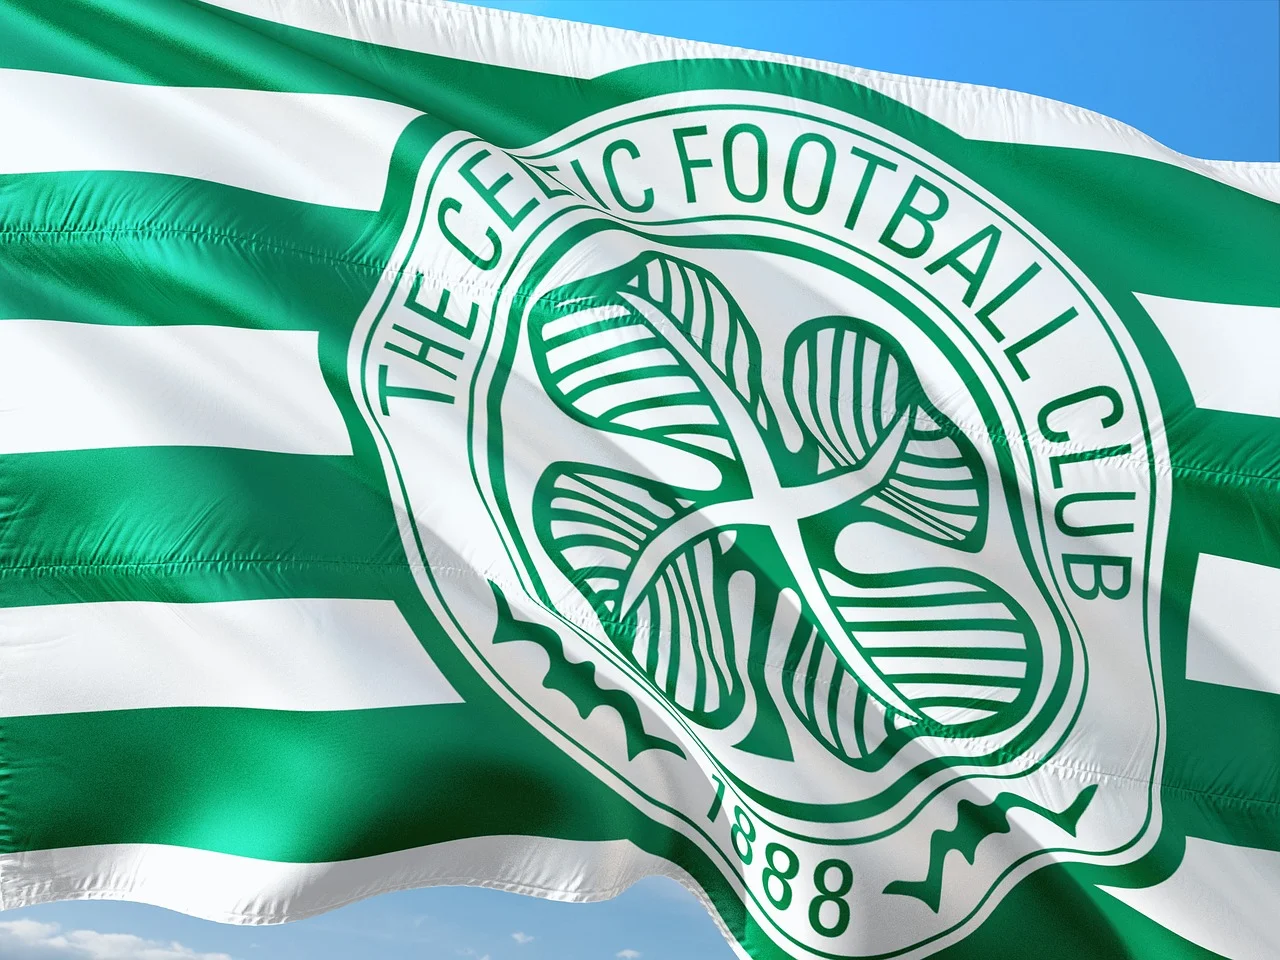 The Celtic Way: A Philosophy of Community and Social Responsibility